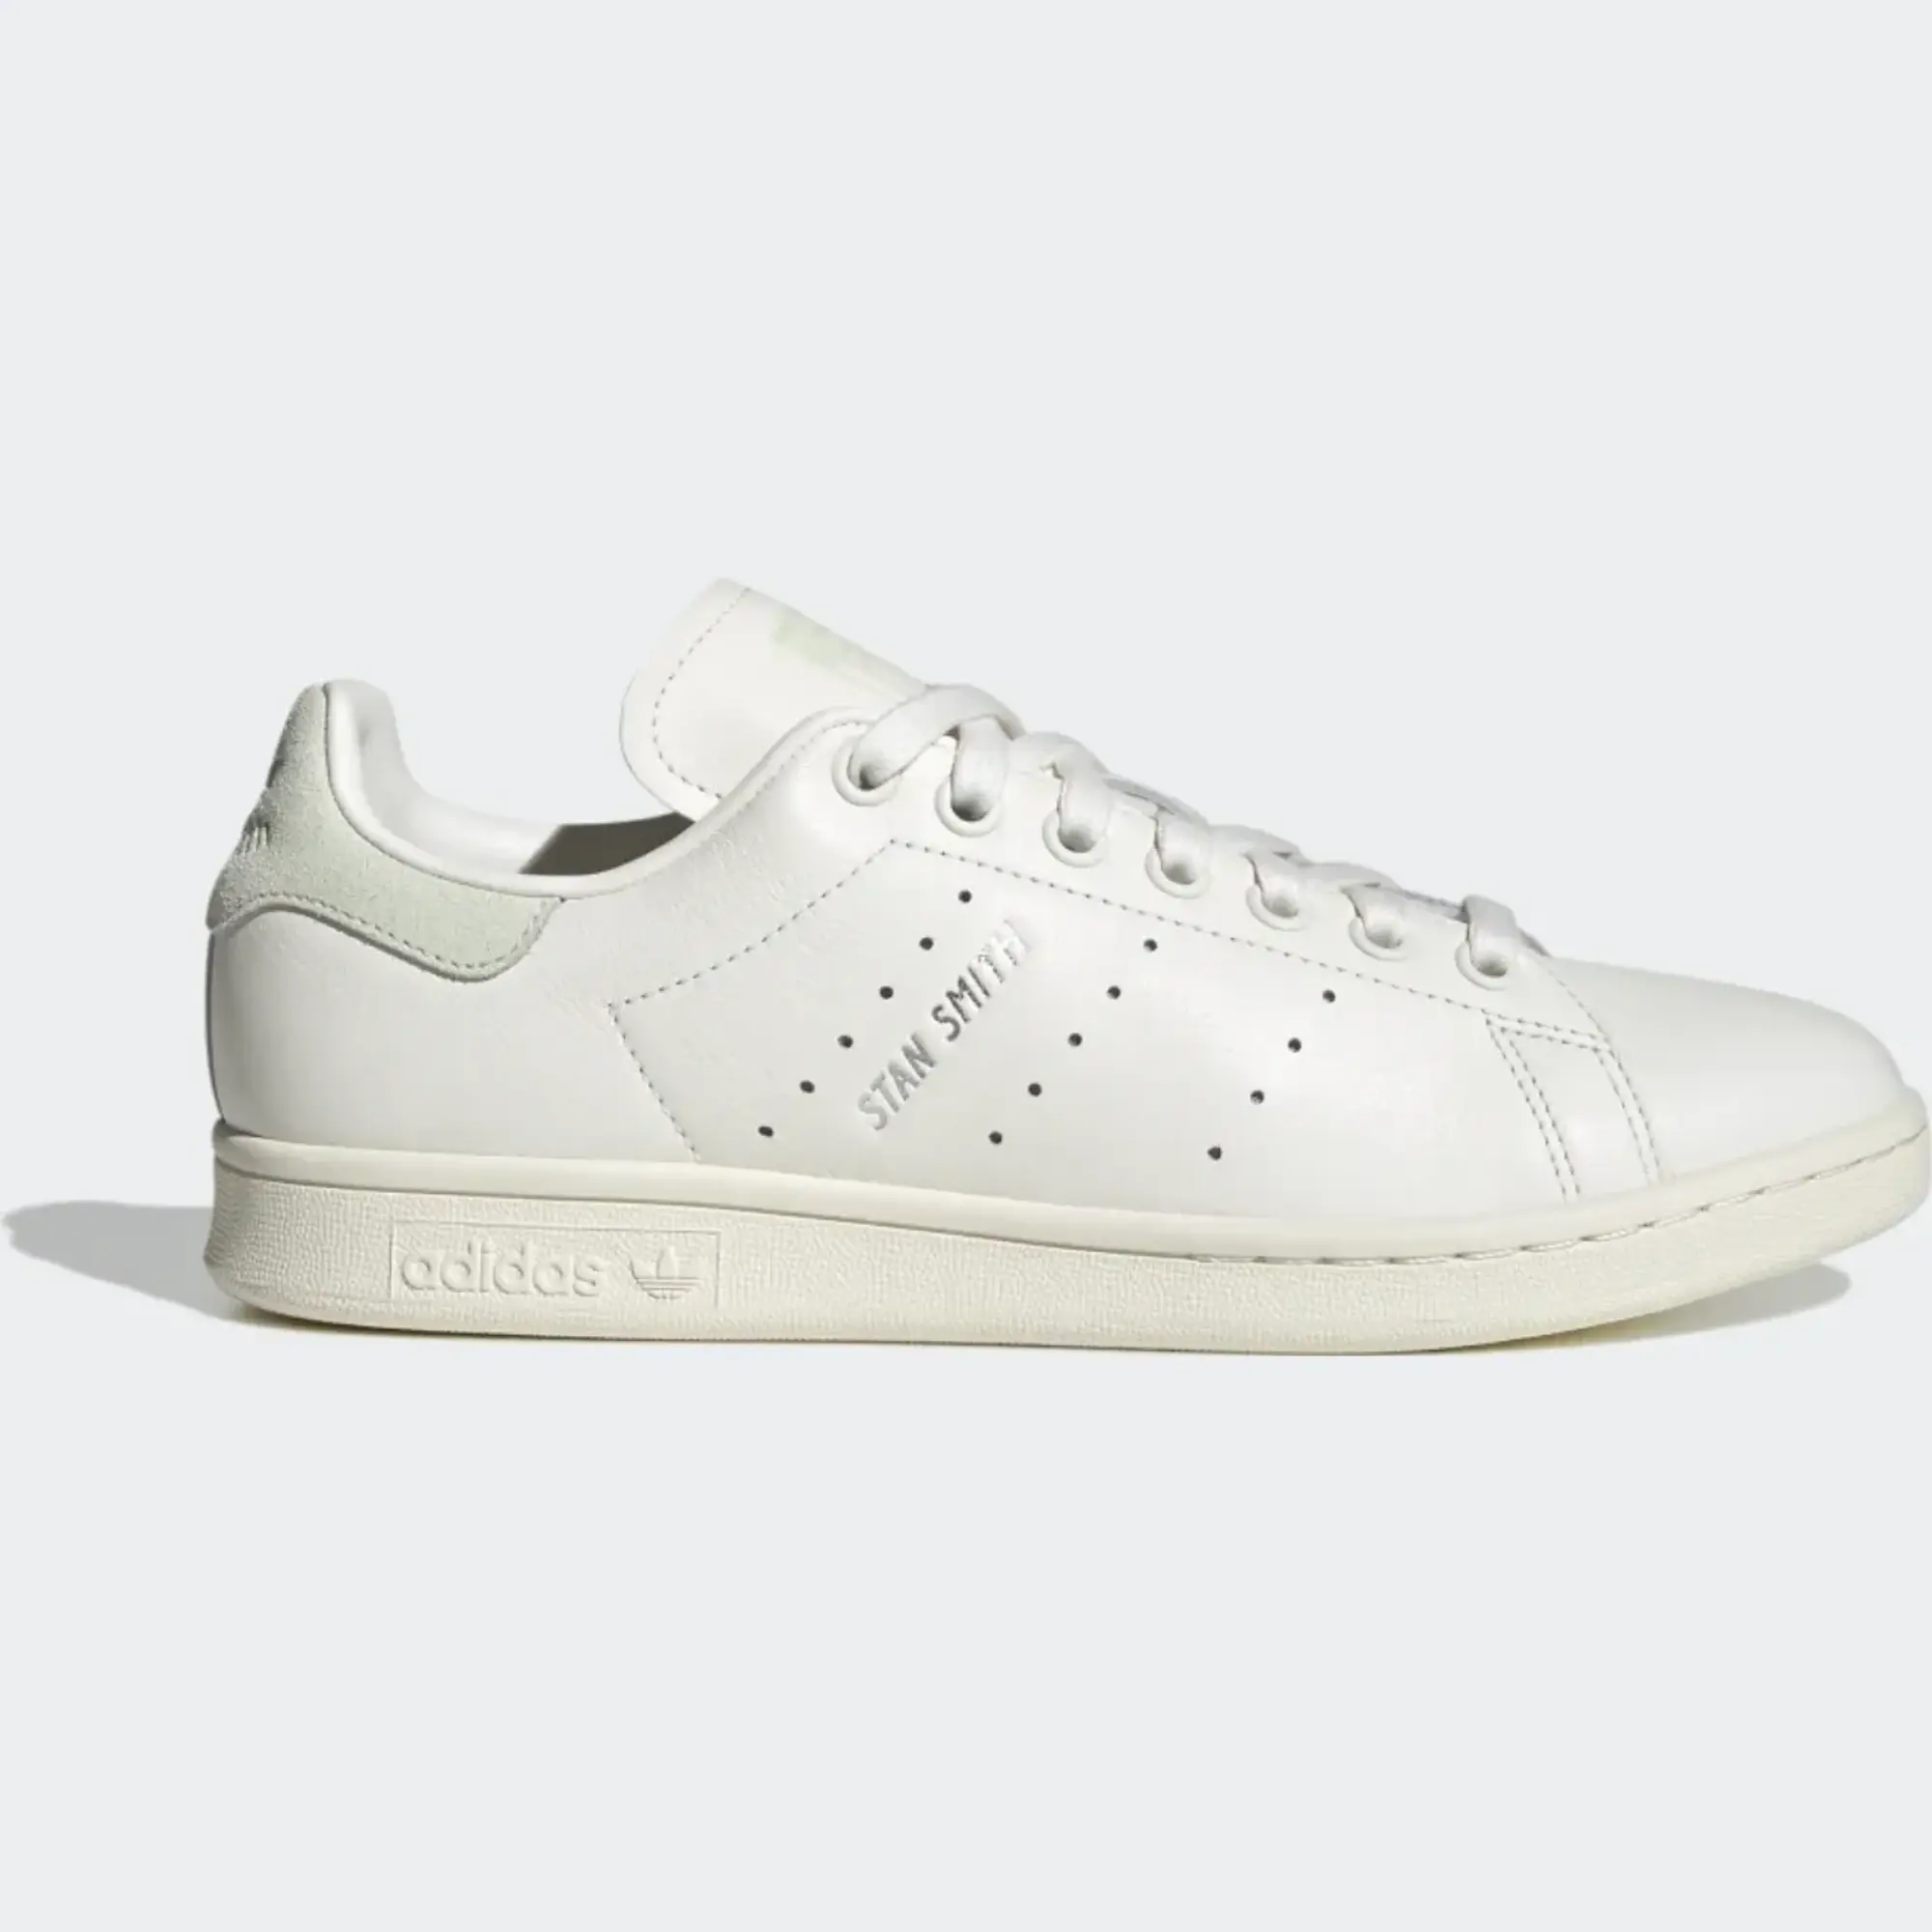 Adidas Originals Stan Smith Trainers In White And Green